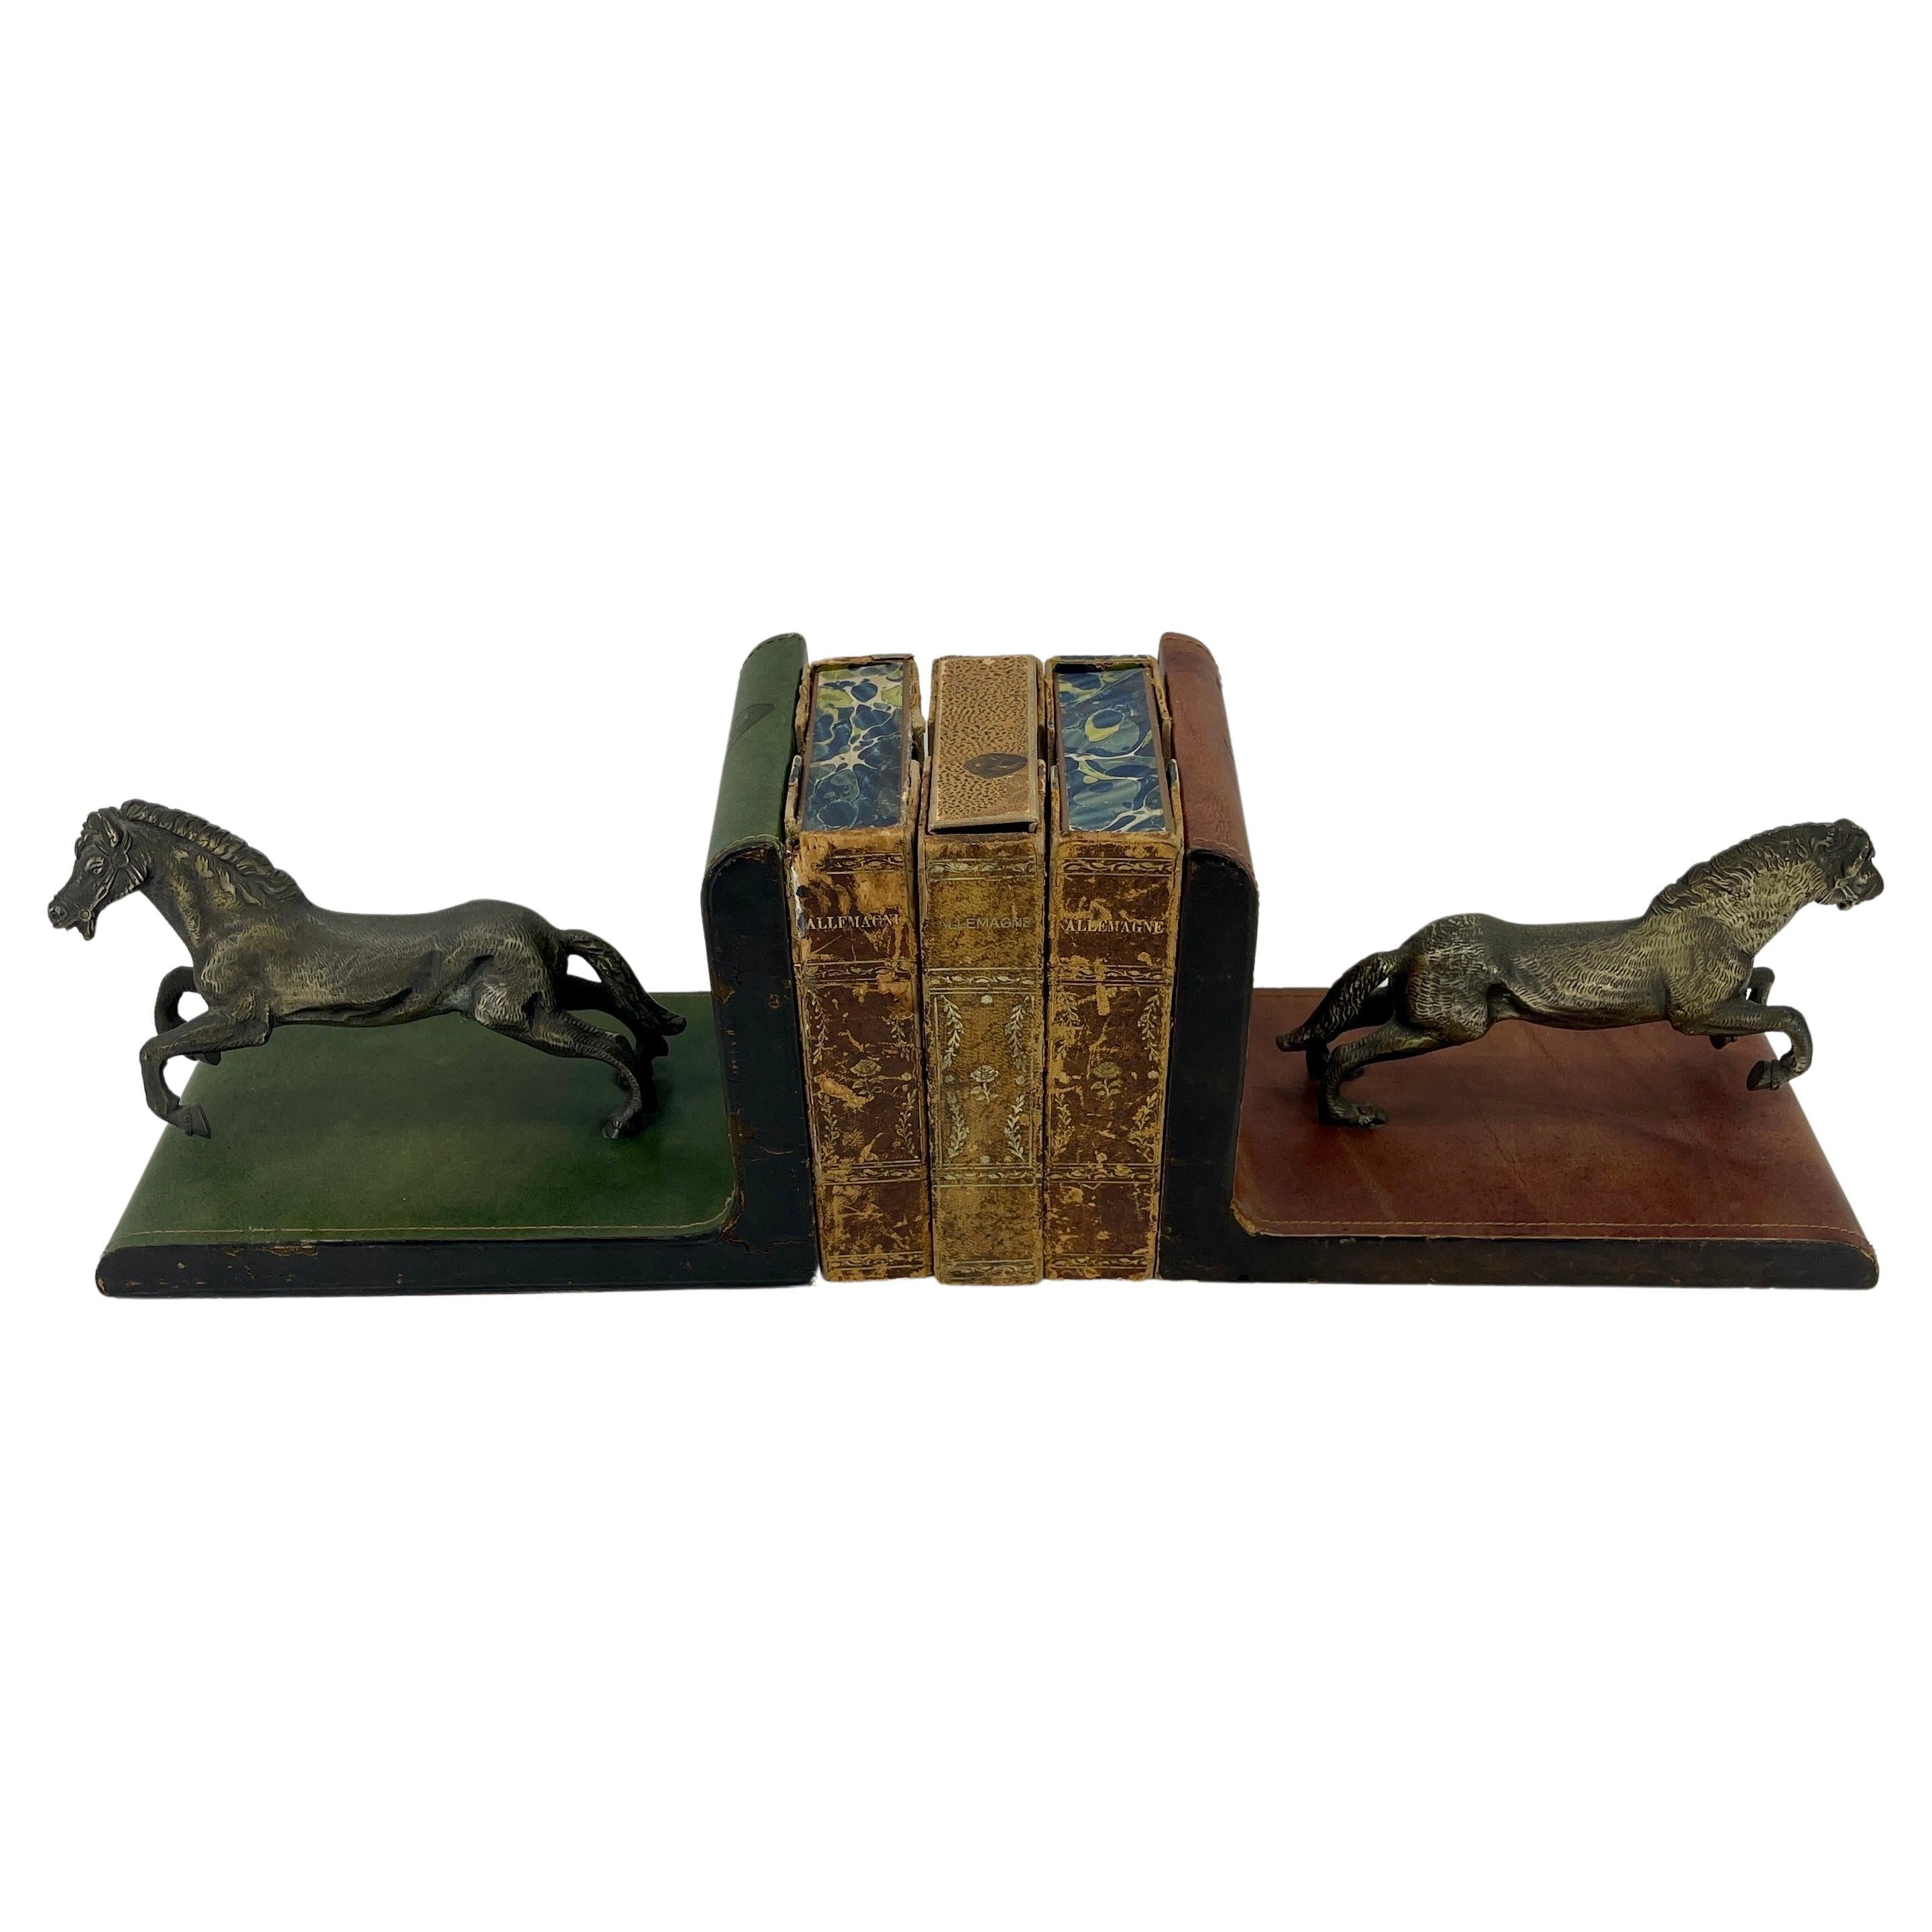 Pair of Italian Red and Green Leather Equestrian Bookends, circa 1950s For Sale 7